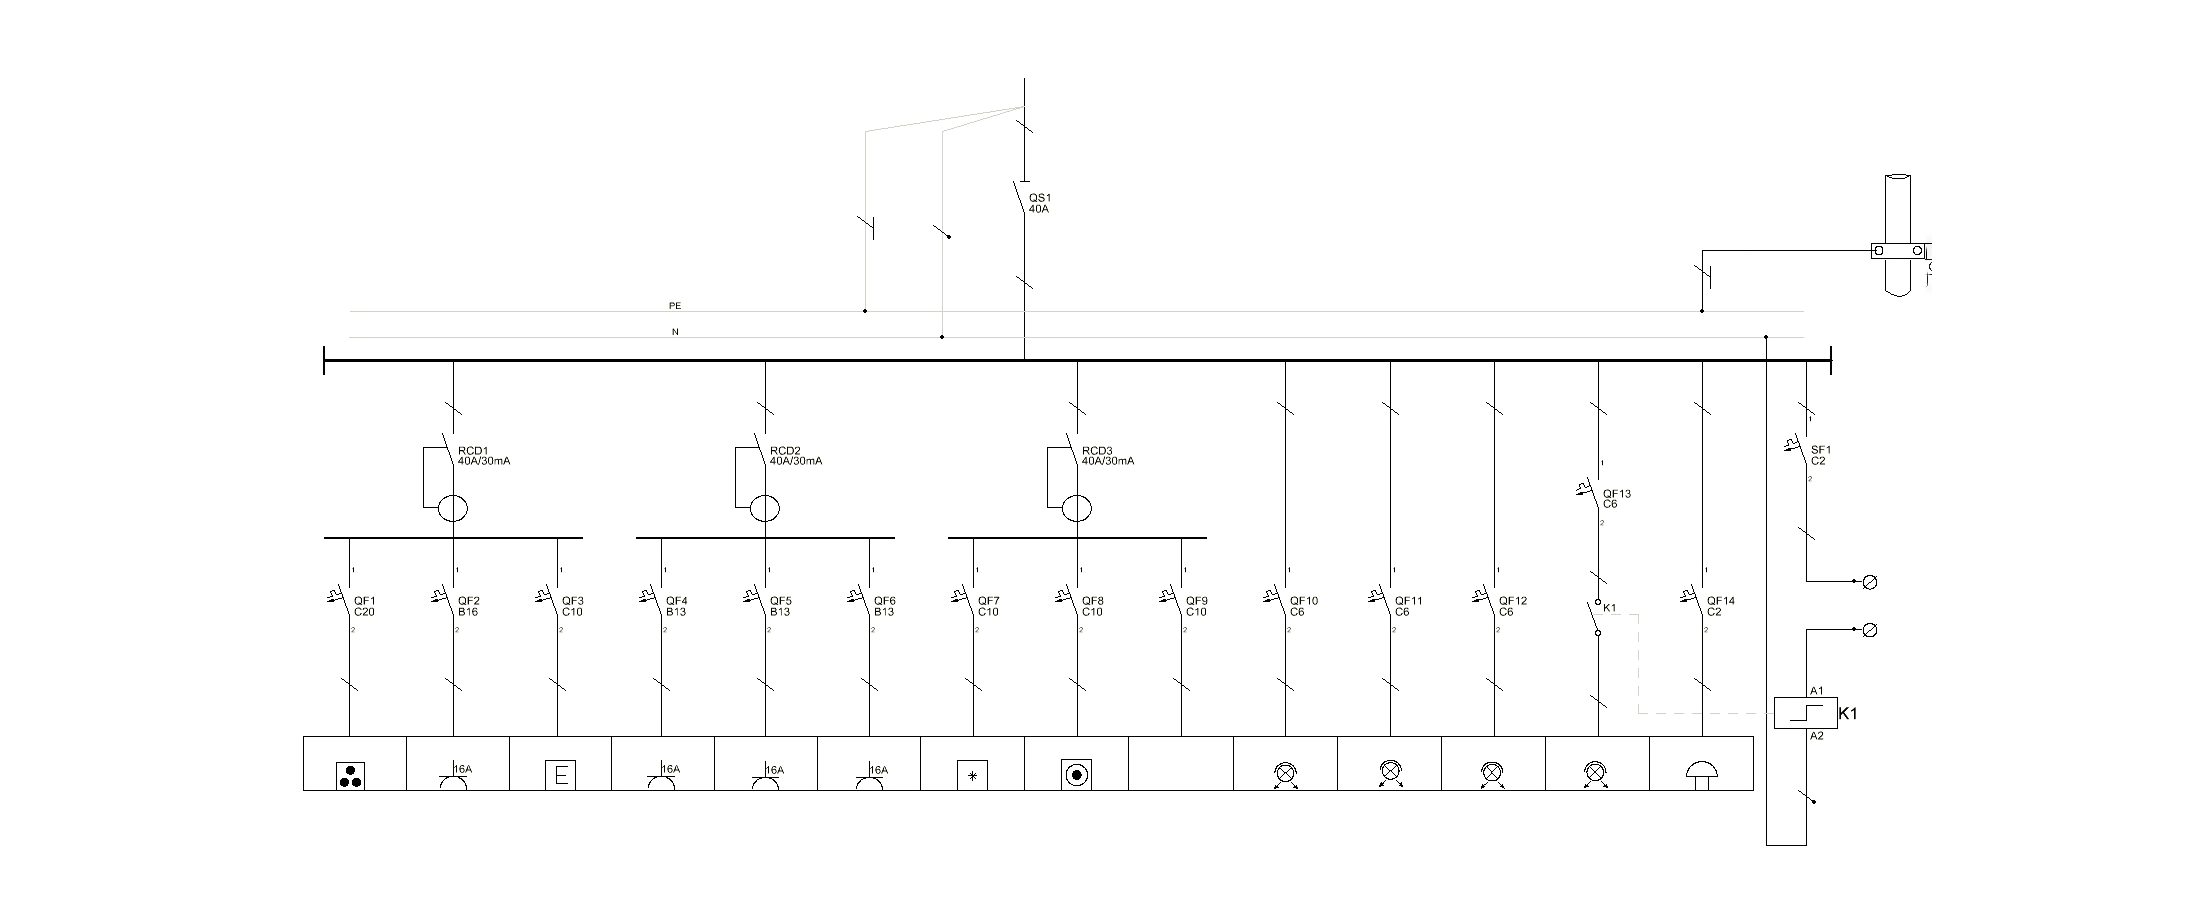 Single Line Diagram For House Wiring 10